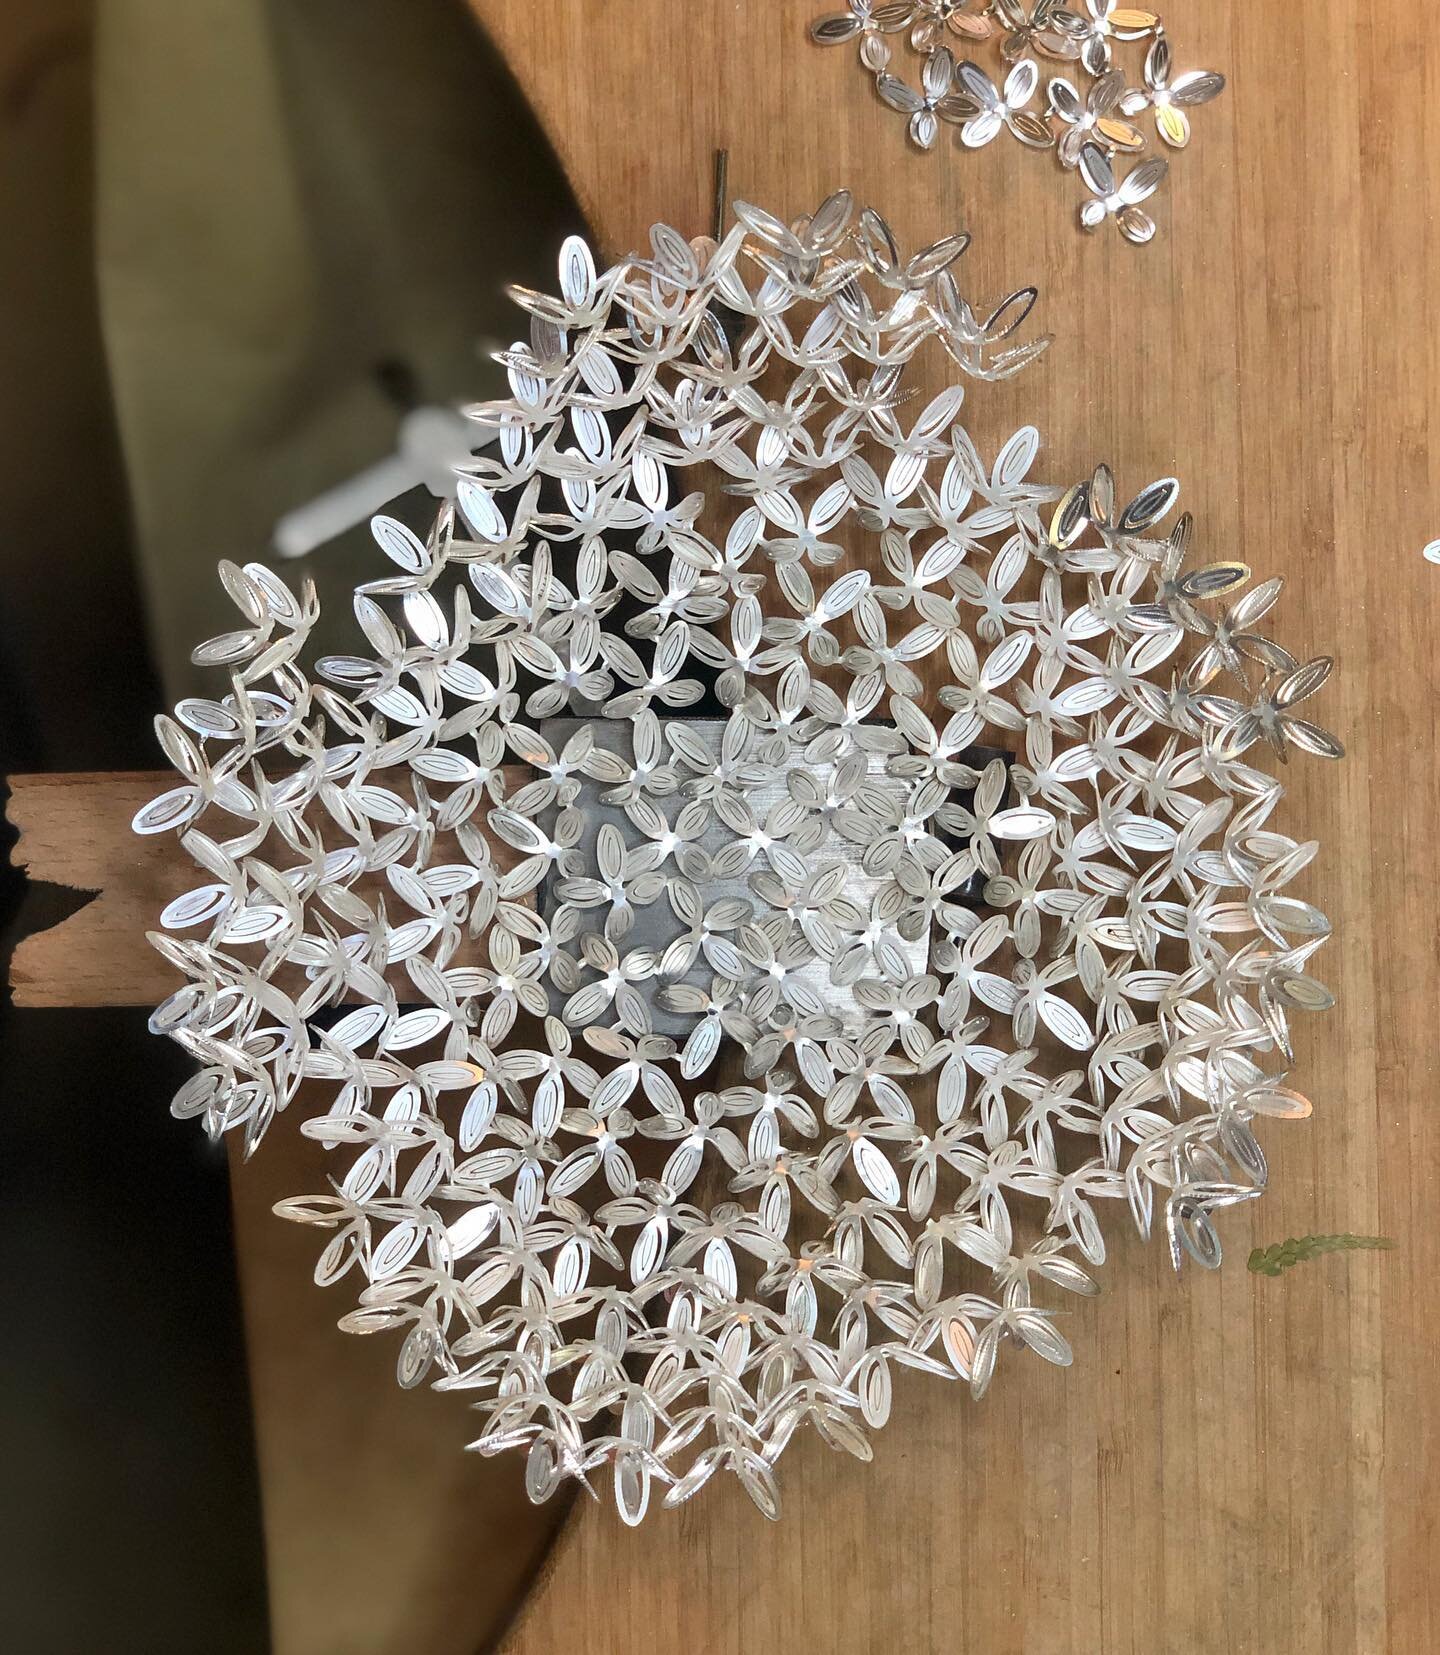 Love how these delicate clusters gradually take shape. See the finished piece at @collectartfair with @craftallianceatlantic ✨🏺✨ Somerset house, south wing, booth S8

#contemporarysilversmithing #handpiercedsilver #sculpturalobjects #ephemeralart #s